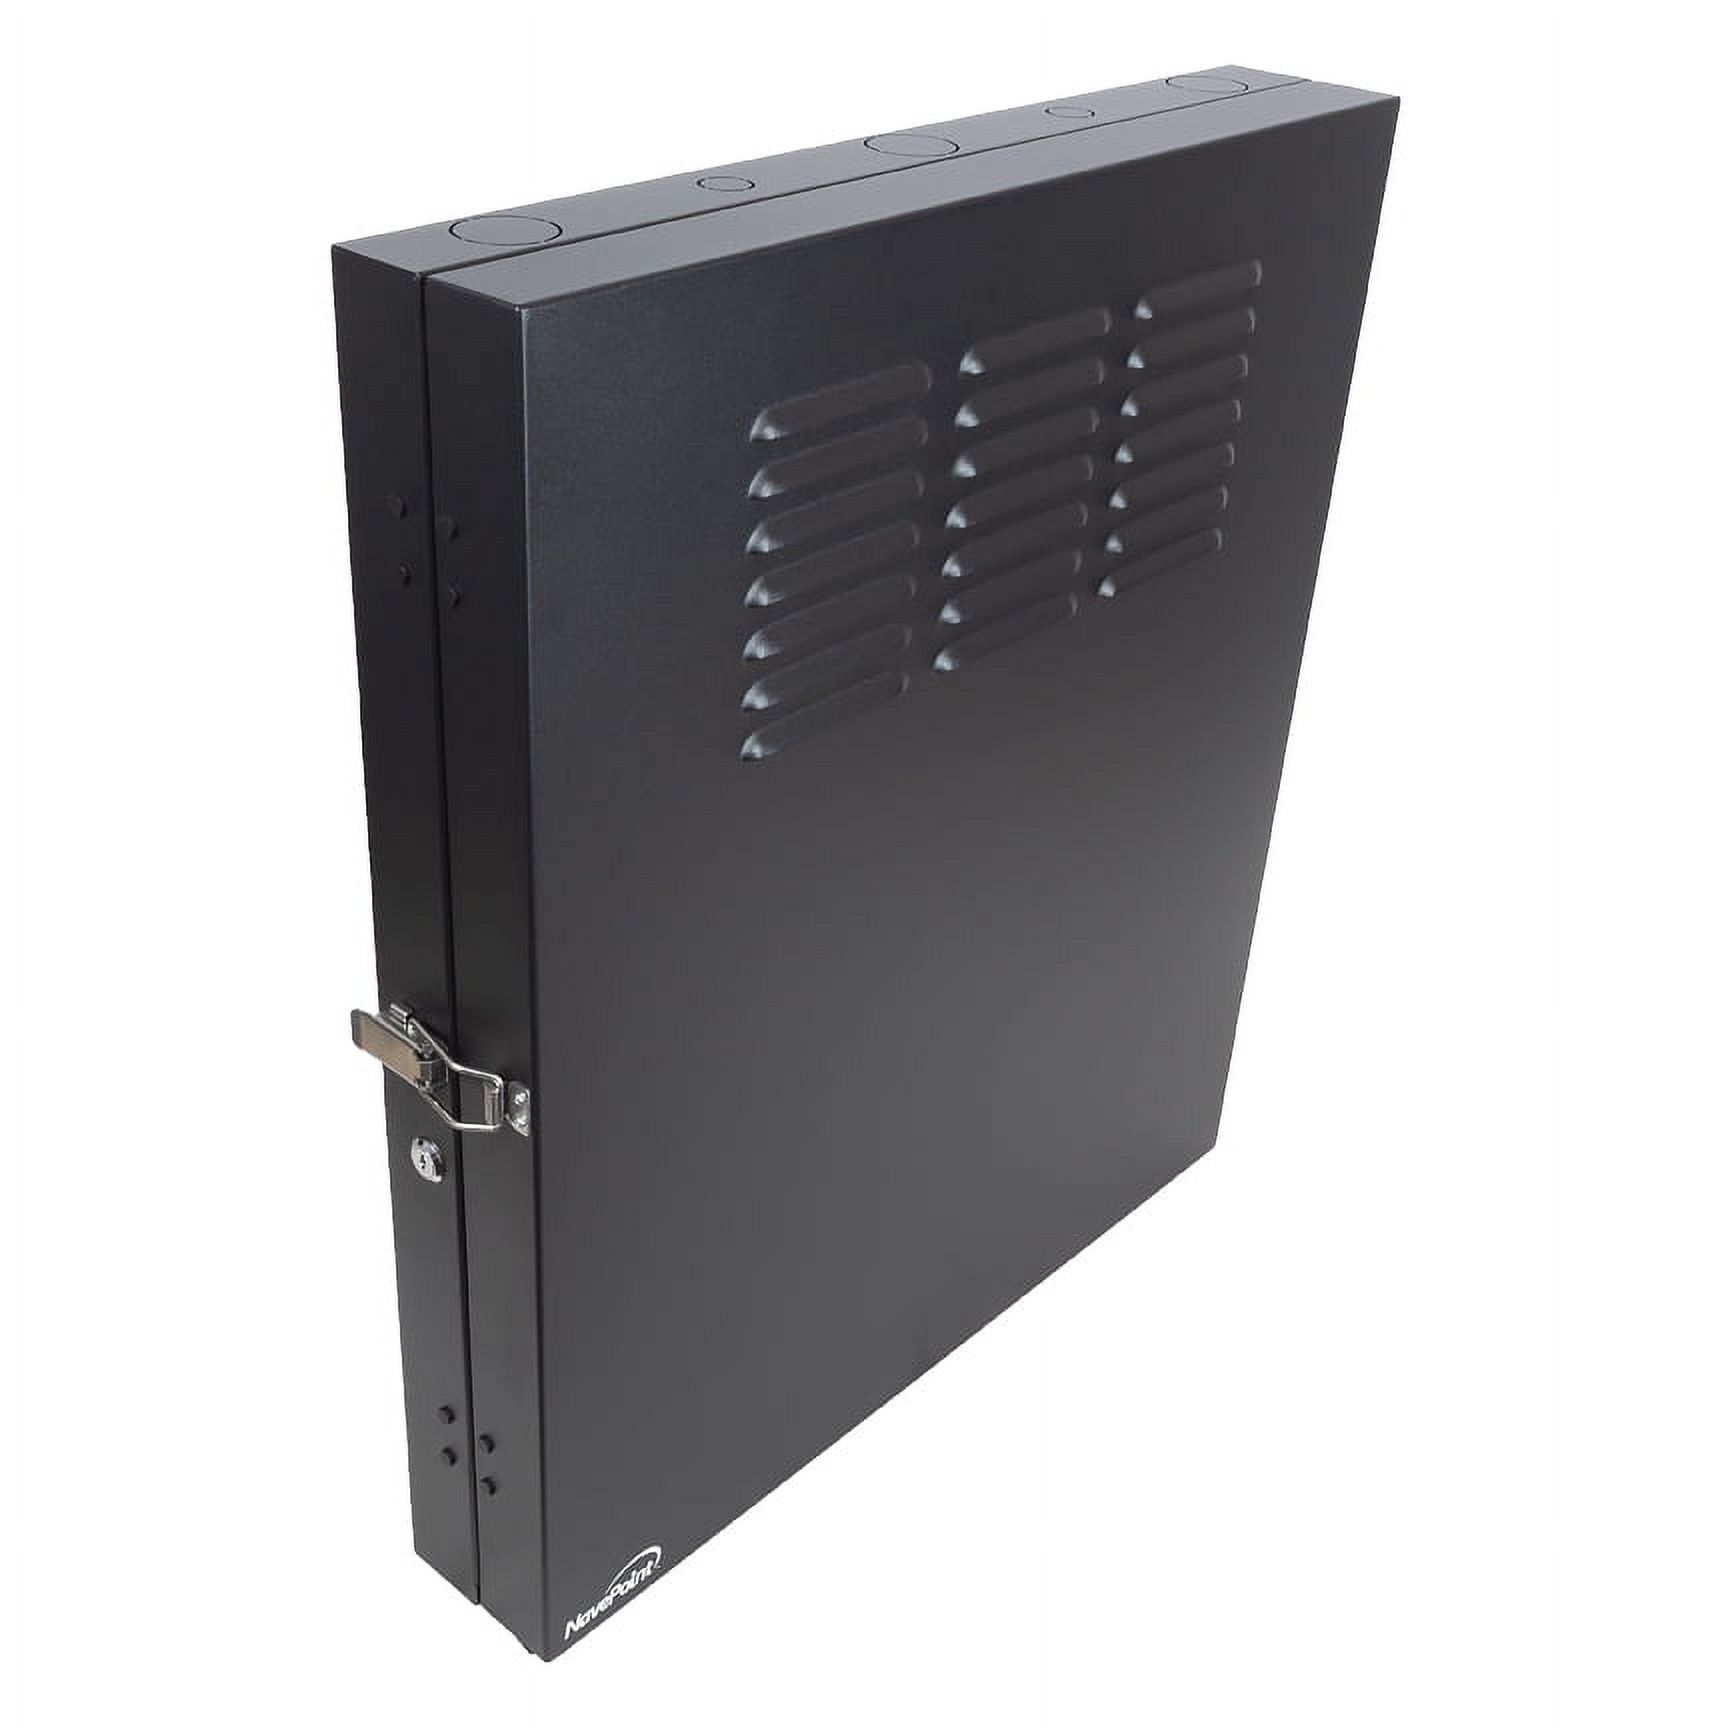 NavePoint 2U Vertical Wall Mount Enclosure for 19" Networking Equipment, Servers, Switch and Patch Panels, Low Profile, 20" Depths, Max Weight Capacity 150 Lbs - image 1 of 6